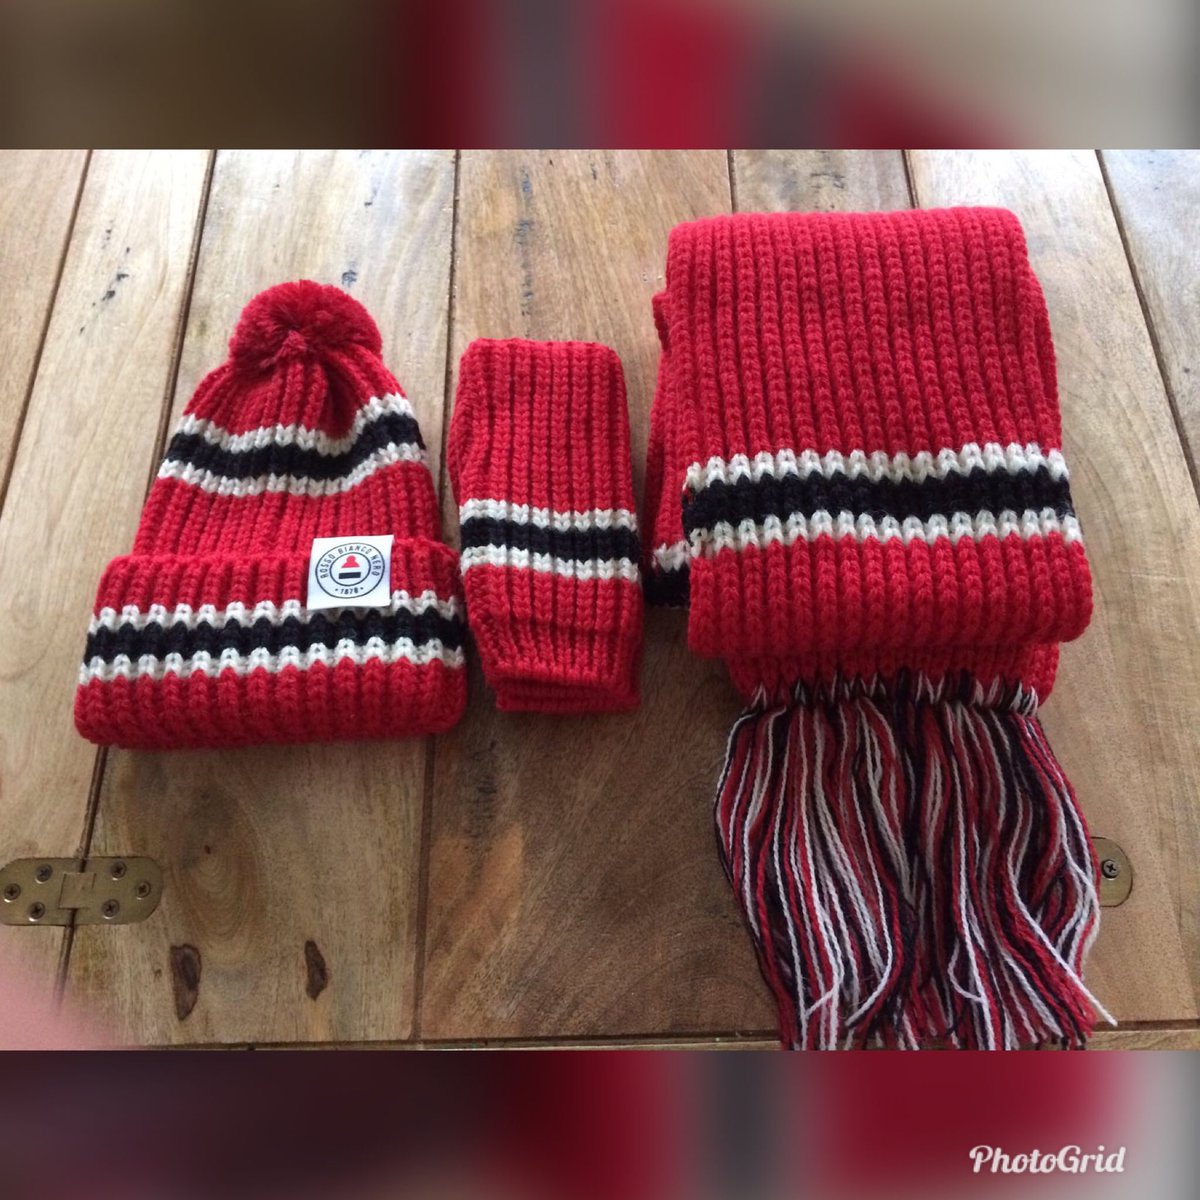 Rossobianconero1878 Our New Unlimited Rosso Bianco And Nero Ranges Will Be Available Back End Of Next Week Ish Bobblehats Scarves Mittens In Red White And Black Colour Ways T Co Fqghnfutzh Rbn1878